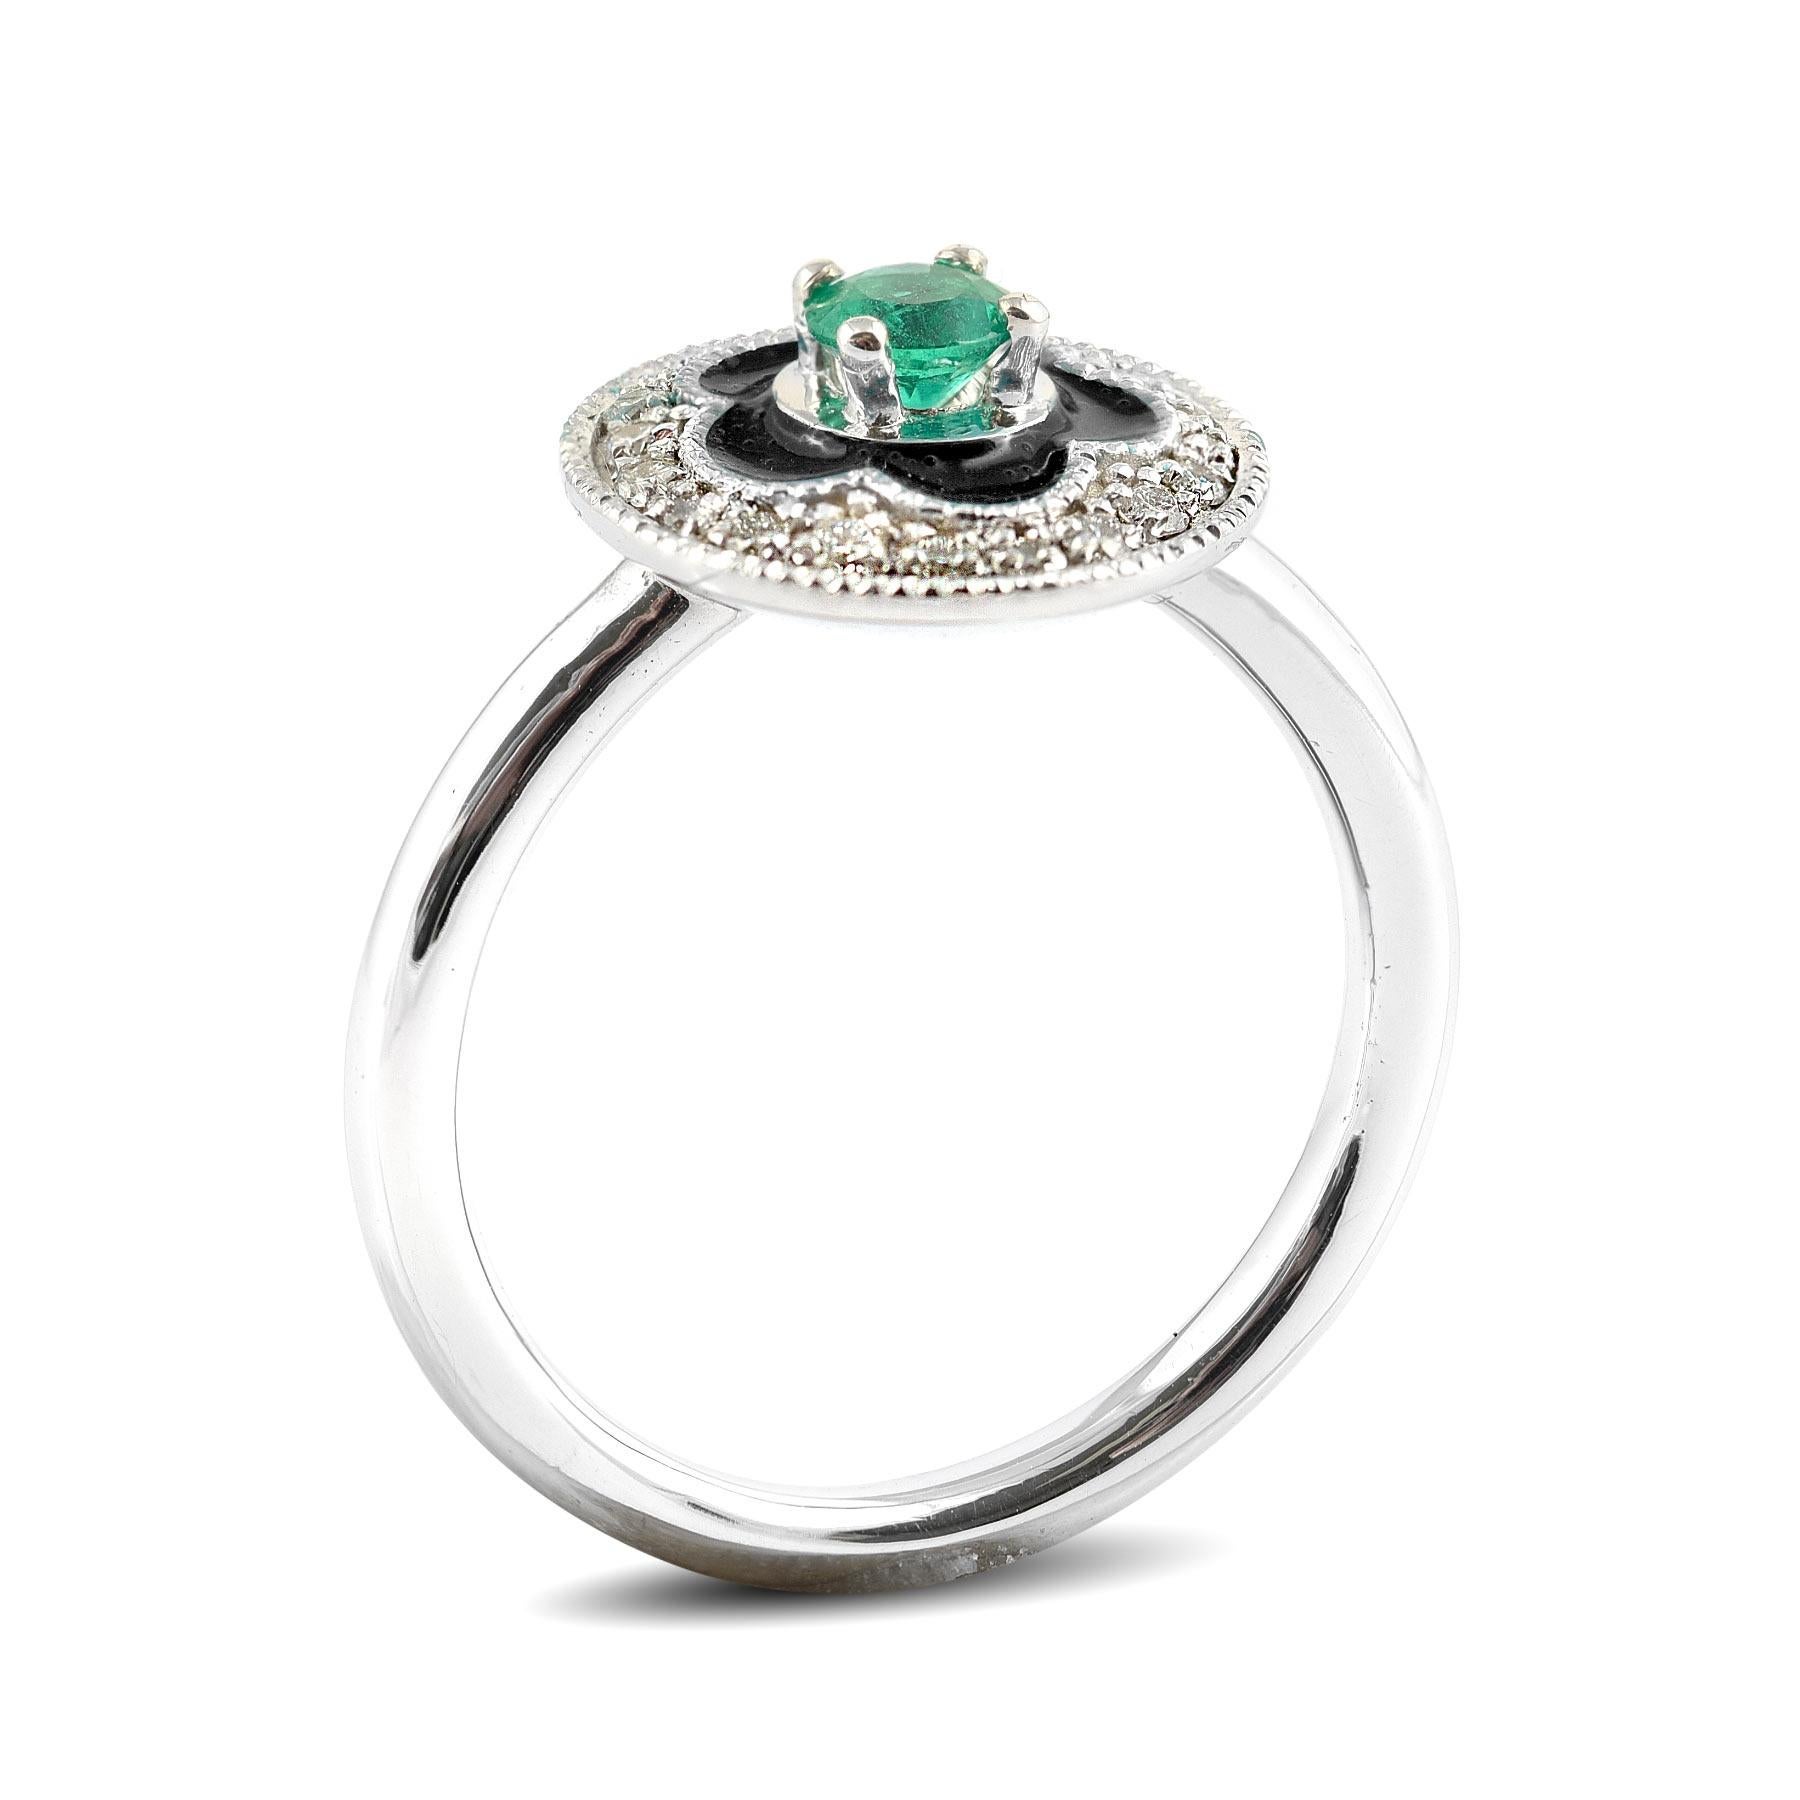 An unexpected choice, this 0.17 carat Emerald and enamel ring is a simple yet indulgent ring. Crafted in 14K white gold, this band also comes set with diamonds that add to its sparkle. A perfect choice when it comes to a gift, this ring will surely